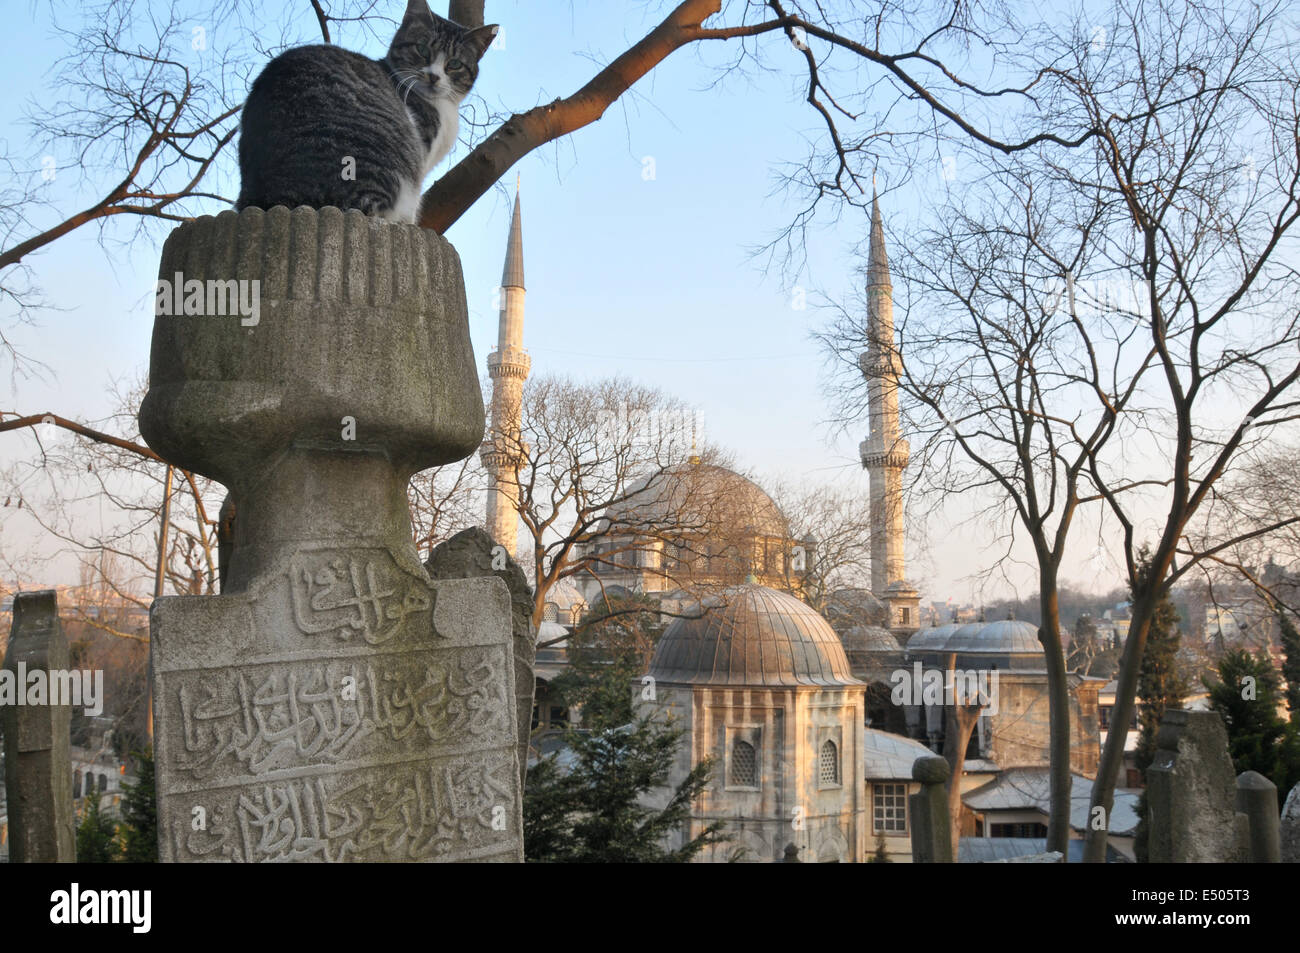 Ottoman-era gravestones in the Eyüp cemetery, with the Eyüp mosque in the background. Stock Photo